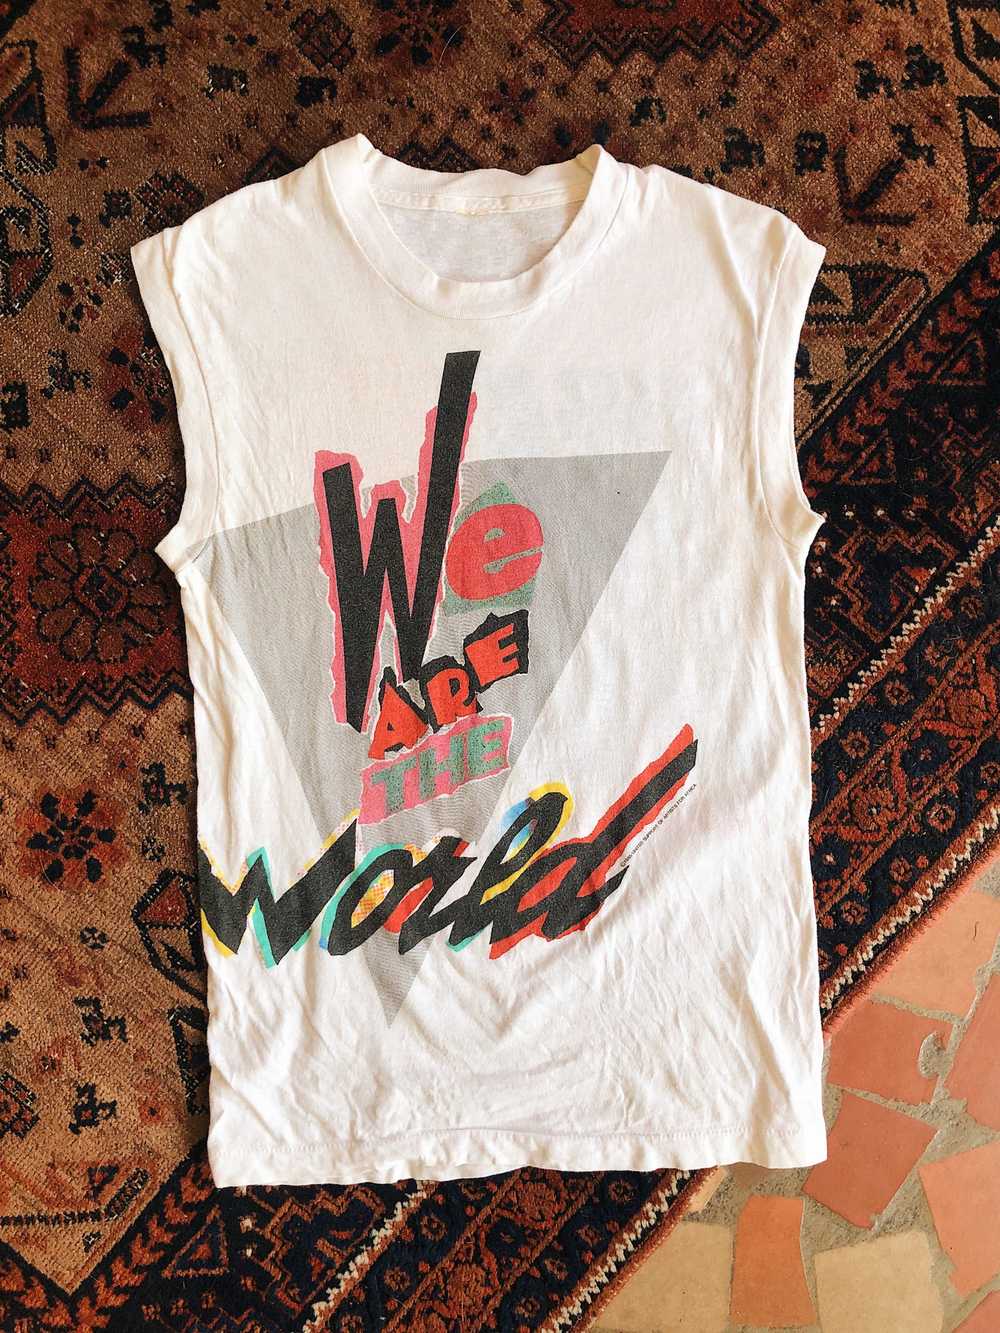 We are the World Tee - image 6